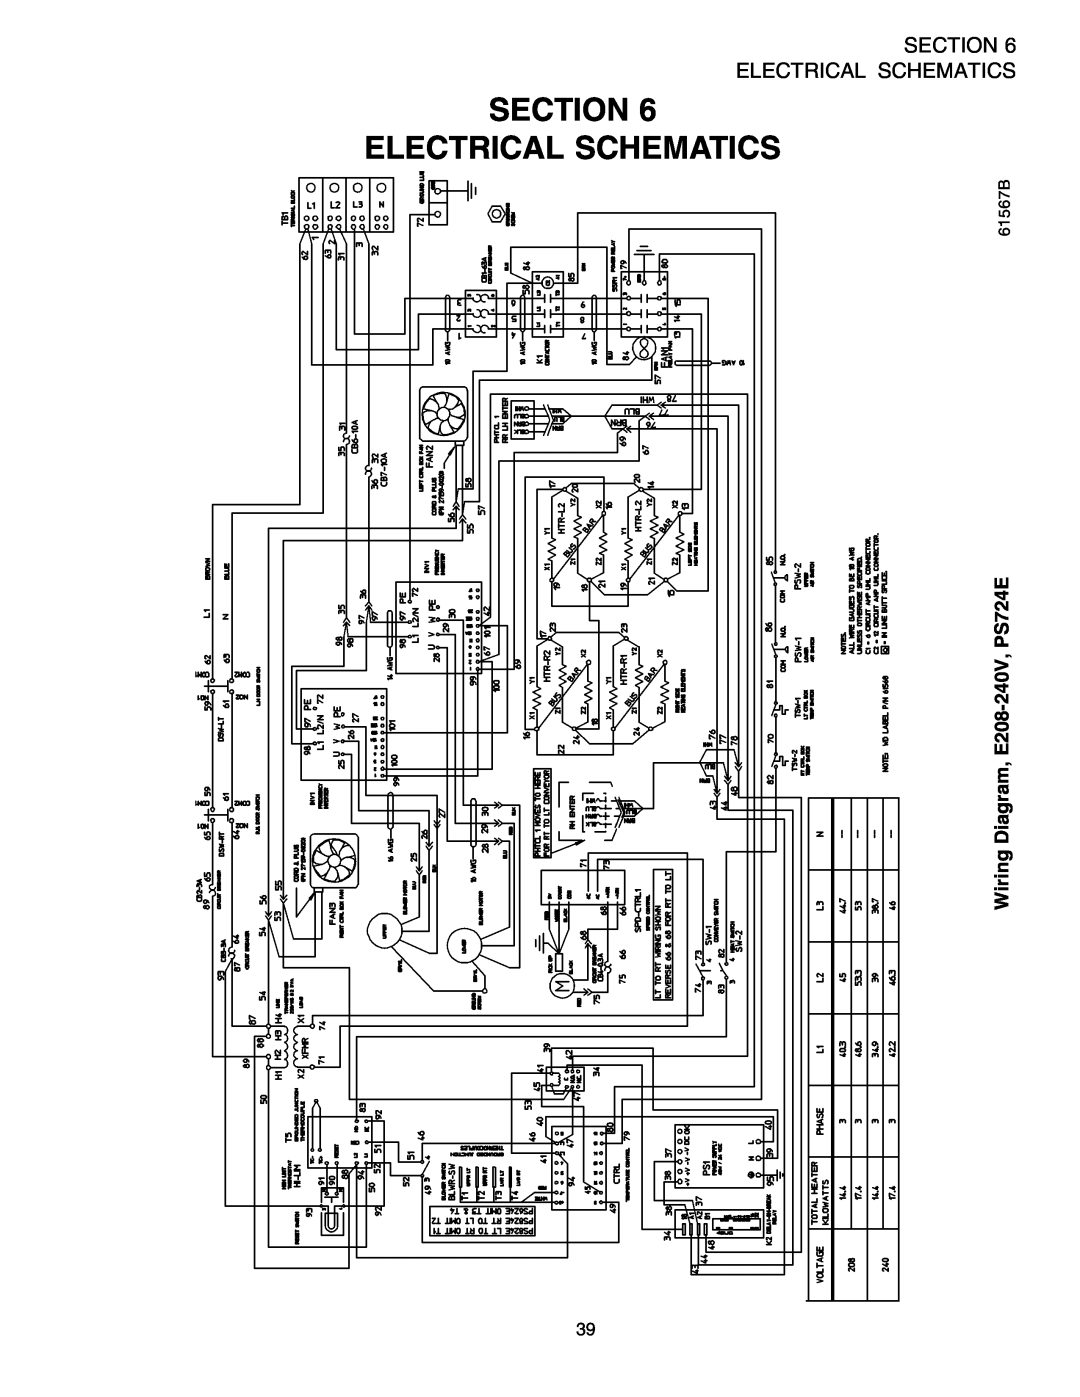 Middleby Marshall installation manual Section Electrical Schematics, Wiring Diagram, E208-240V, PS724E, 61567B 